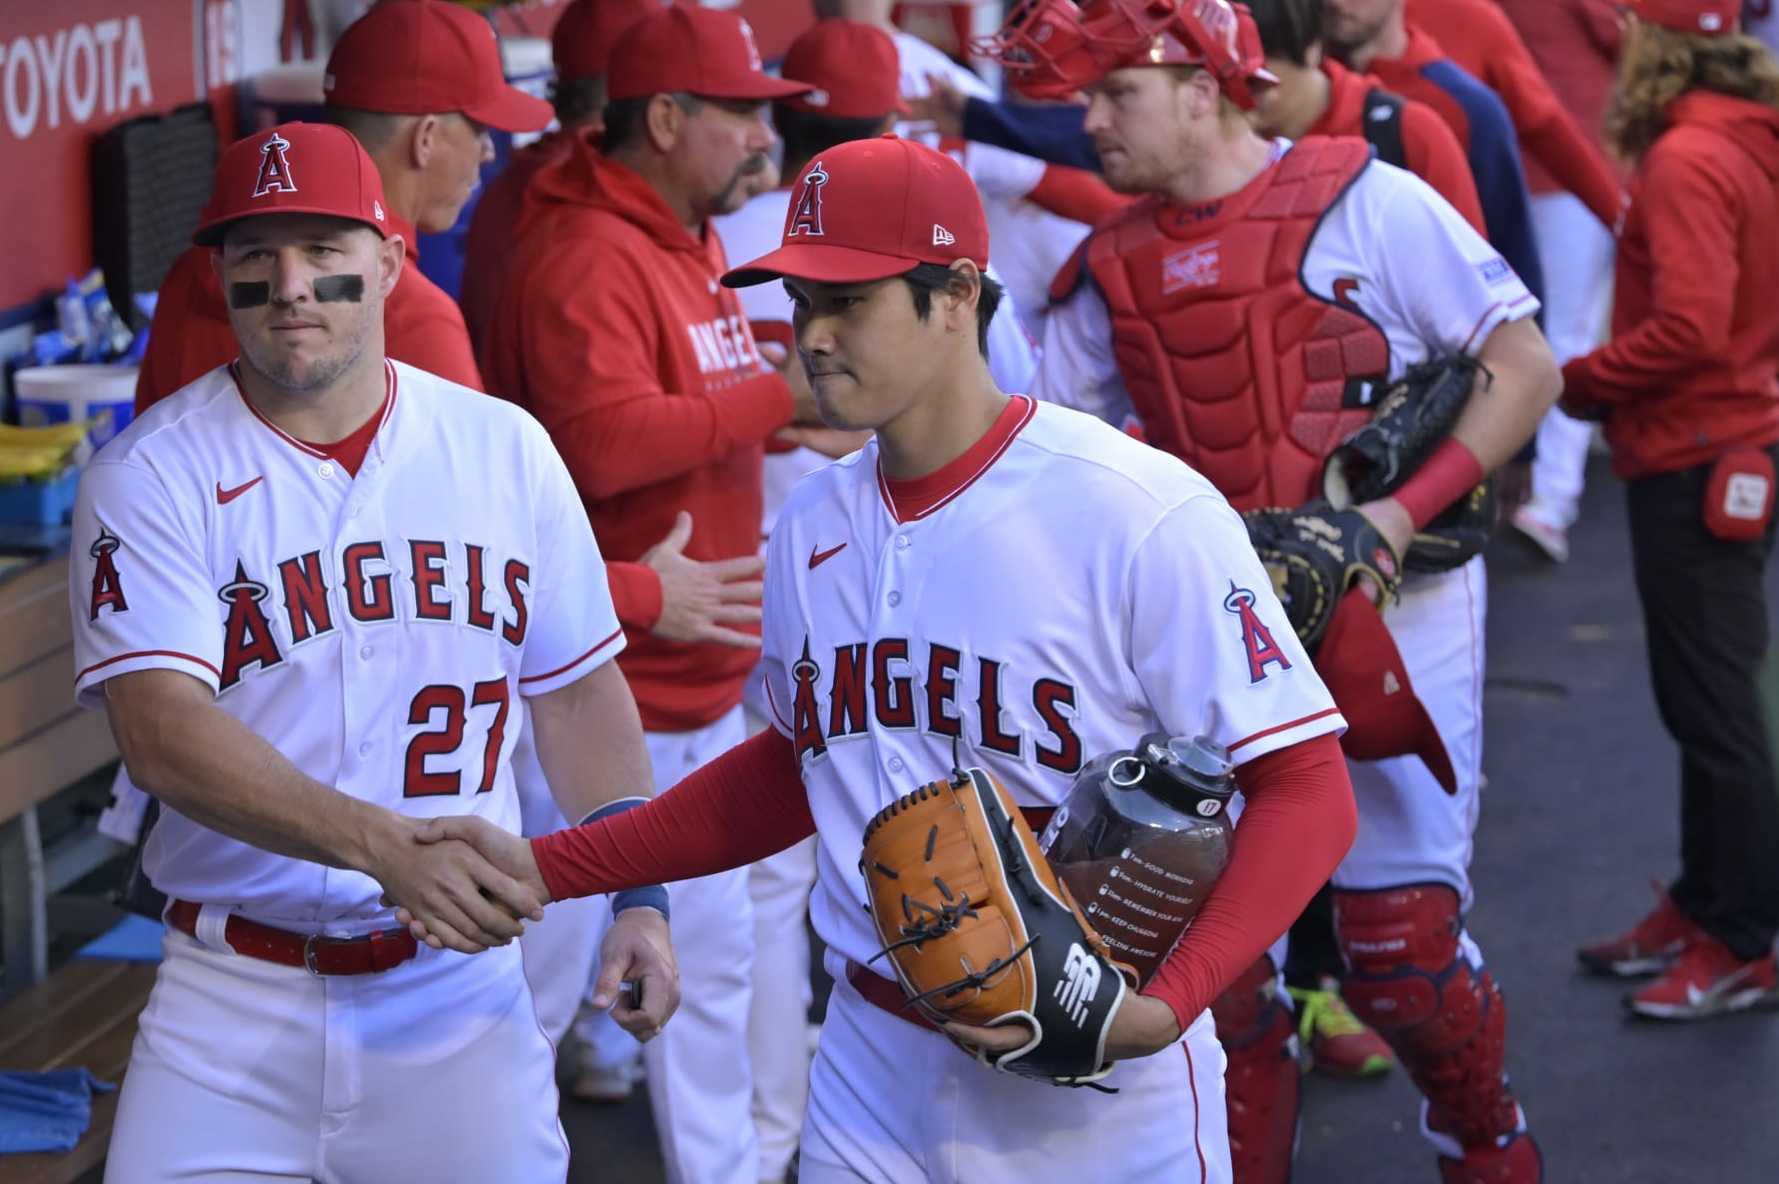 Angels need to trade Mike Trout this offseason - The 3rd Man In